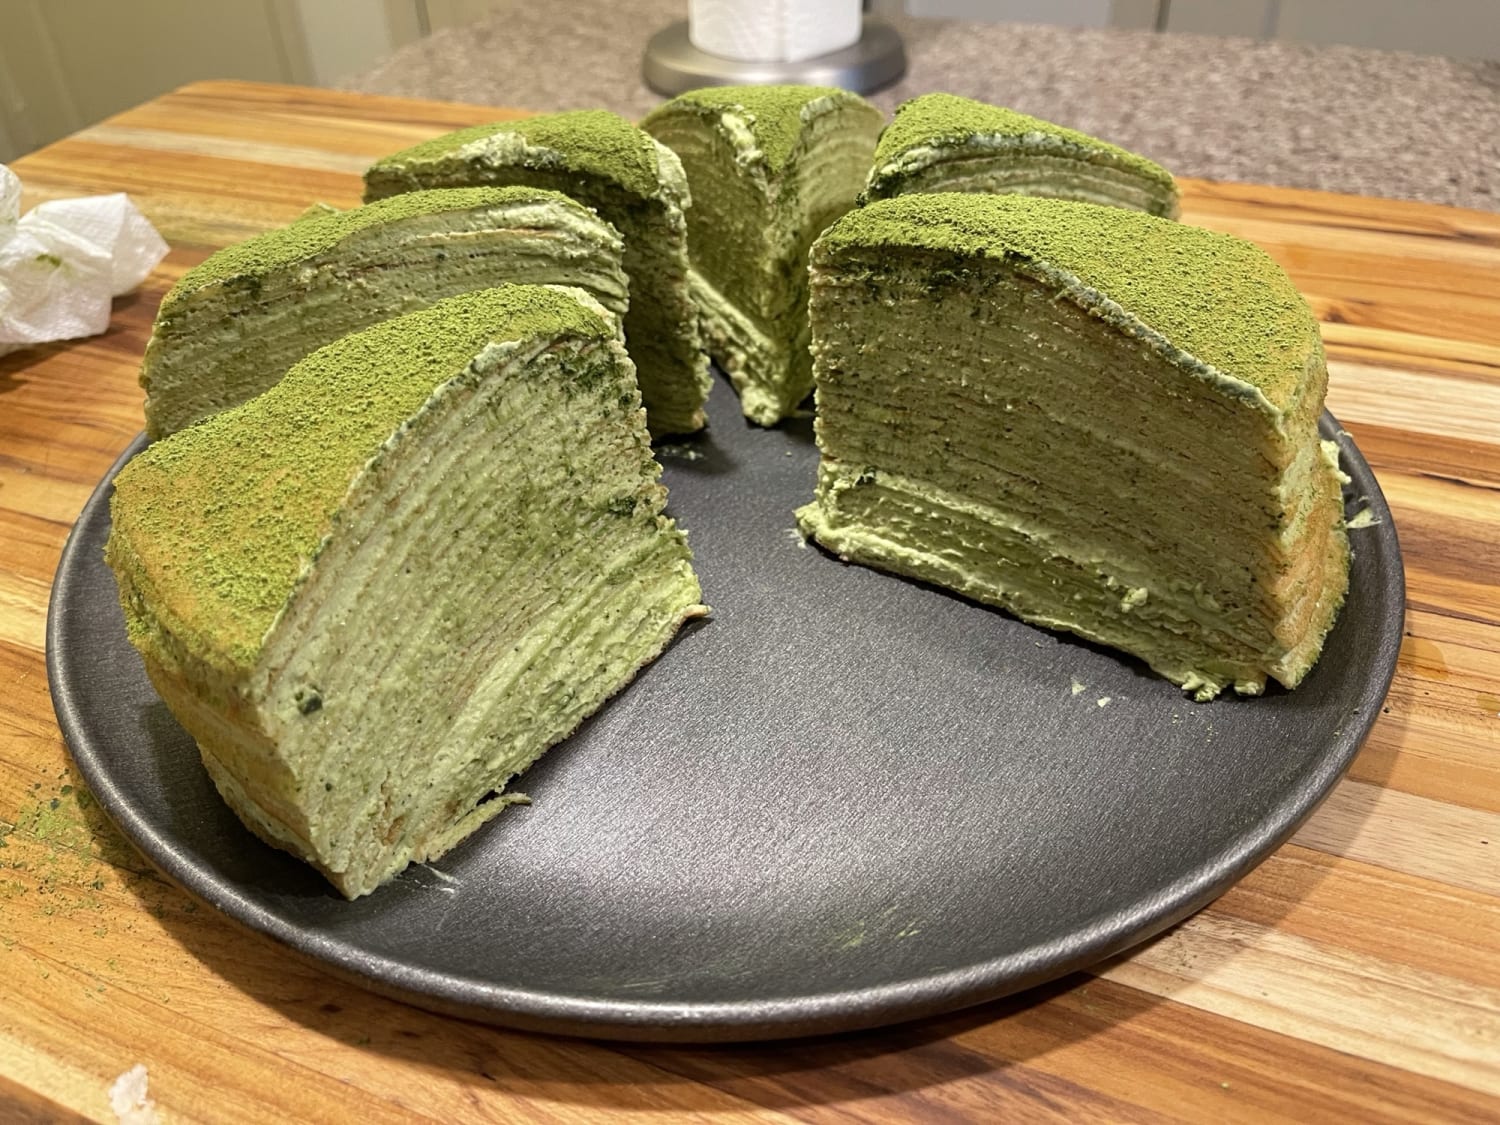 I’m still gushing about how well my matcha mille crepe cake turned out